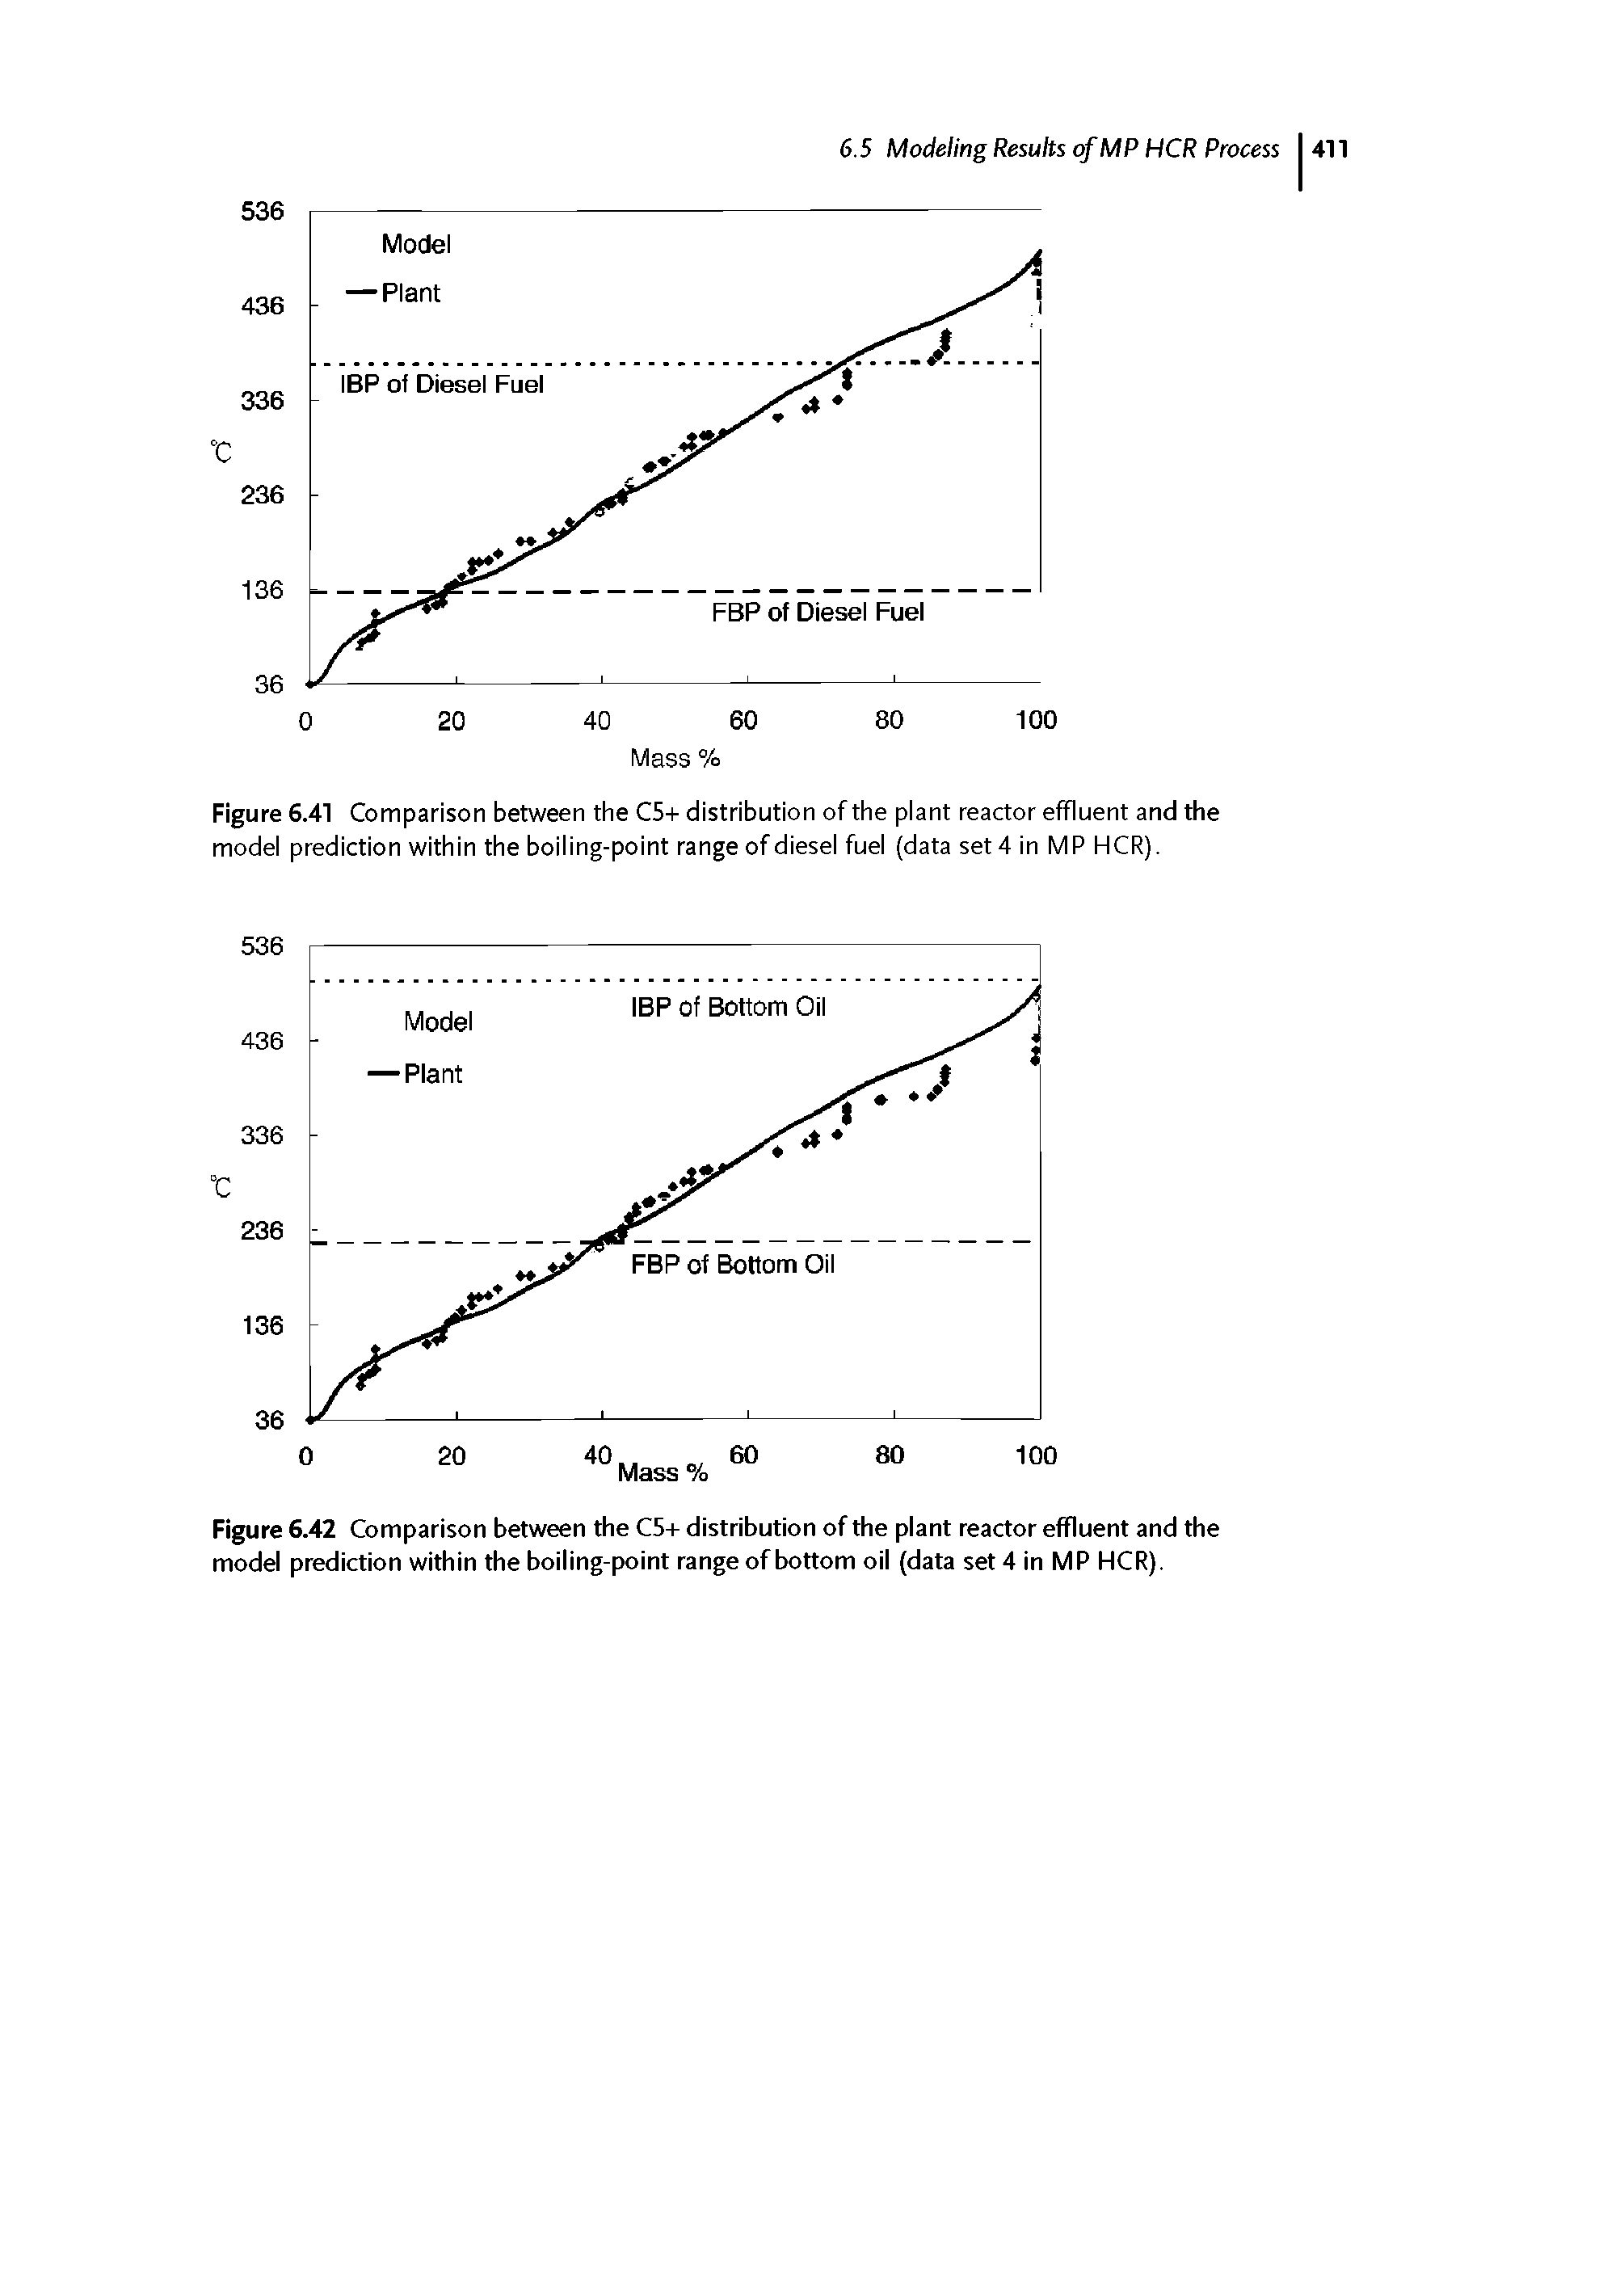 Figure 6.41 Comparison between the C5+ distribution of the plant reactor effluent and the model prediction within the boiling-point range of diesel fuel (data set 4 in MP HCR).